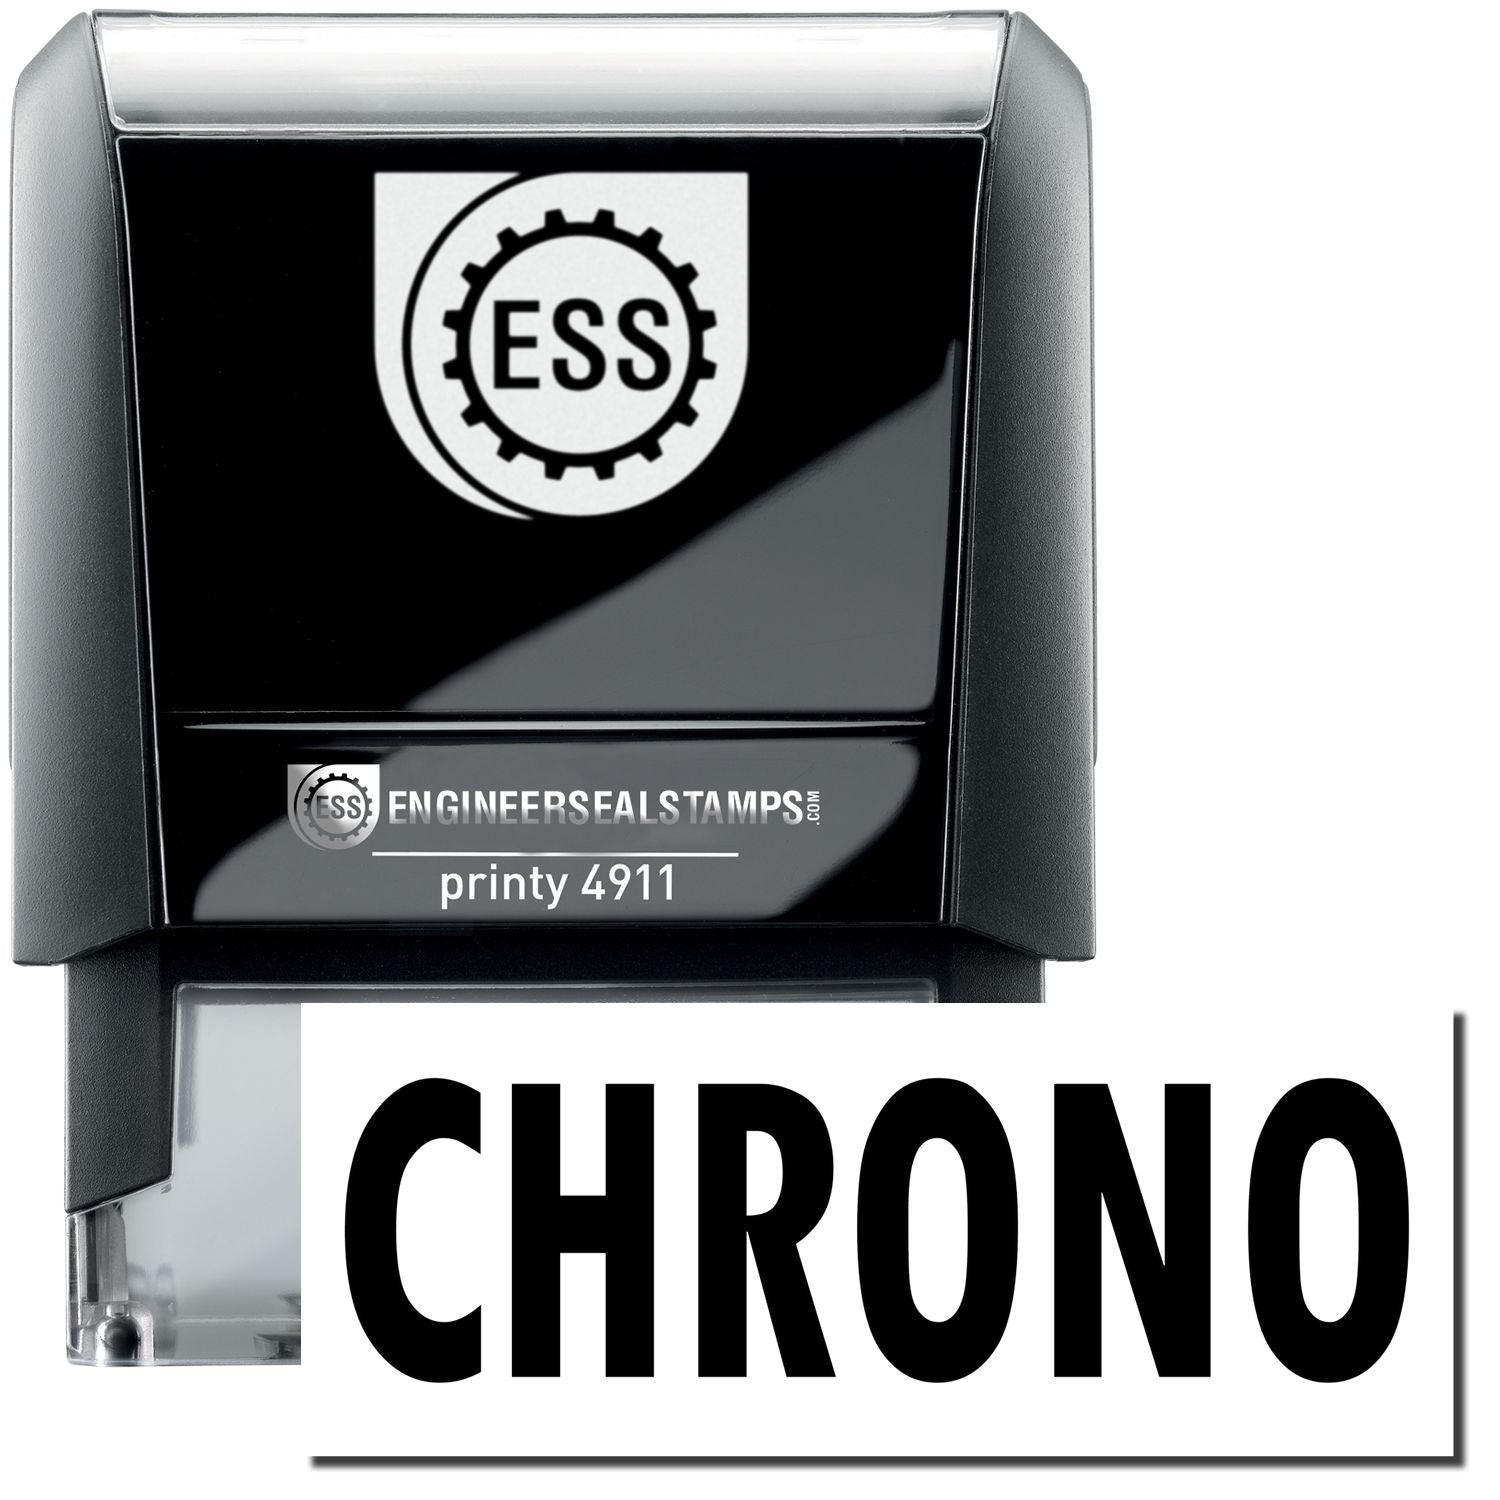 A self-inking stamp with a stamped image showing how the text "CHRONO" is displayed after stamping.